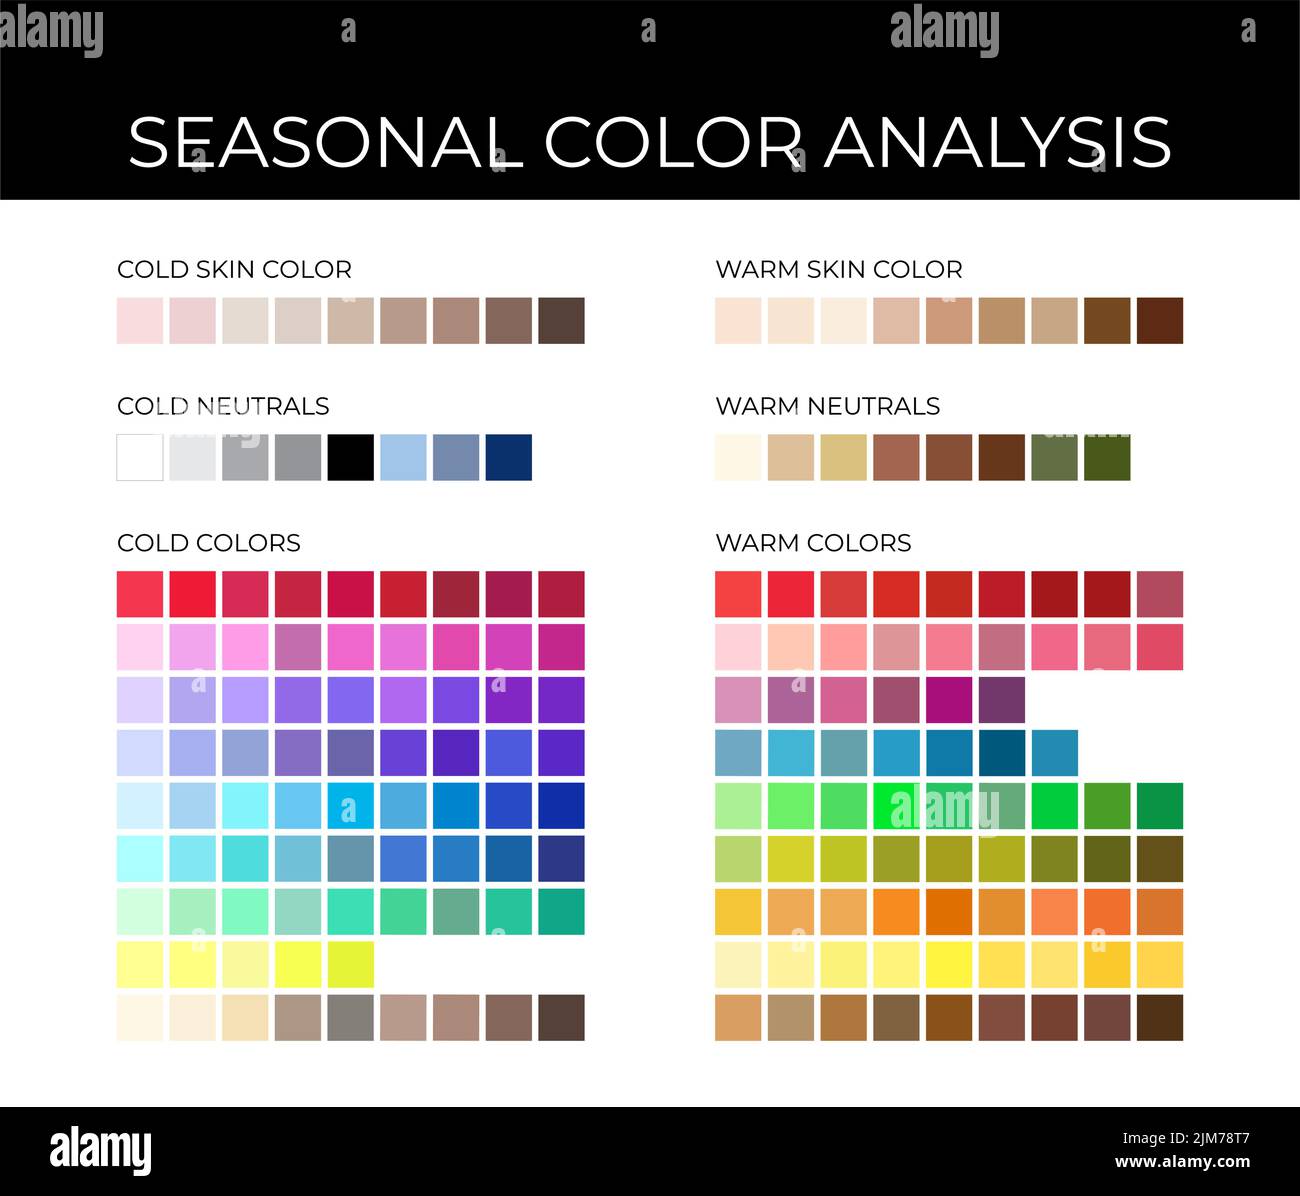 Seasonal Color Analysis Palette with Cold and Warm Color Swatches, Neutrals, Skin Shades Stock Vector